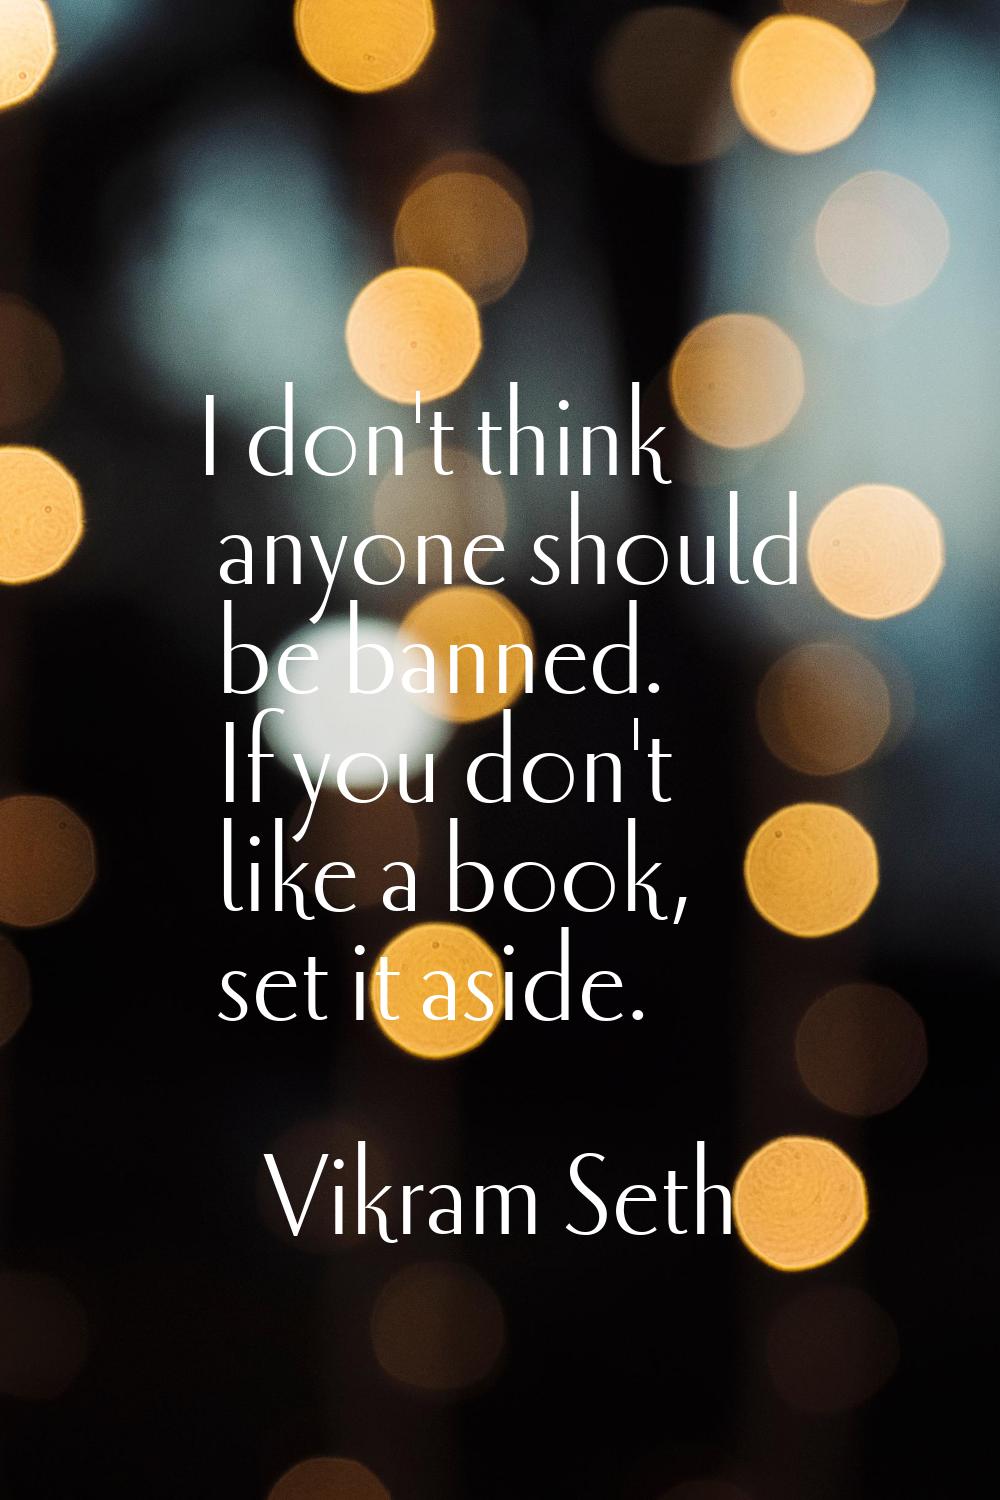 I don't think anyone should be banned. If you don't like a book, set it aside.